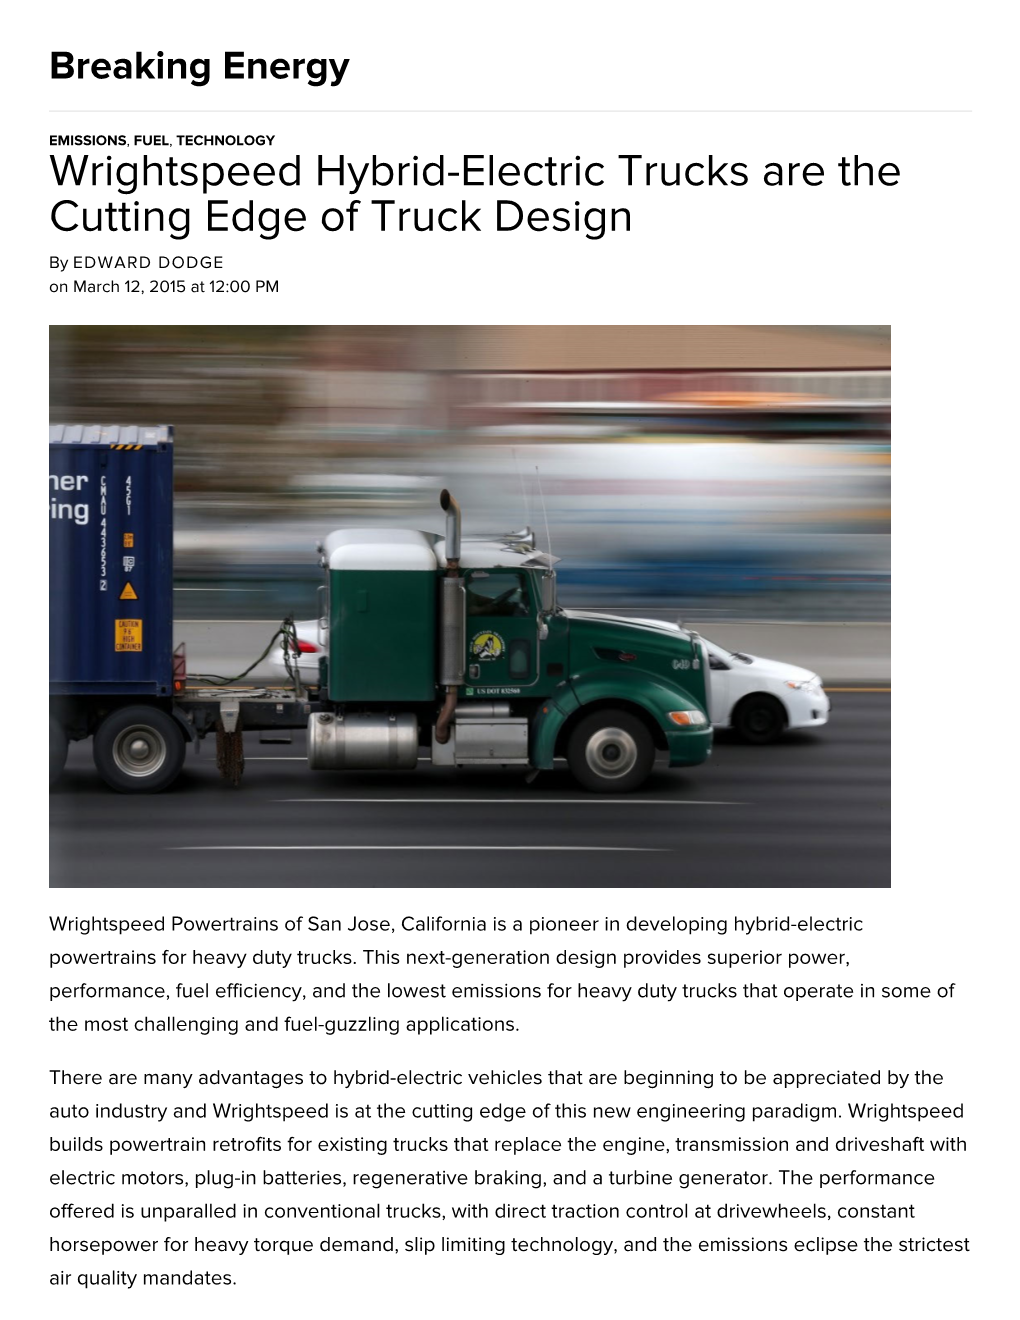 Wrightspeed Hybrid-Electric Trucks Are the Cutting Edge of Truck Design by EDWARD DODGE on March 12, 2015 at 12:00 PM